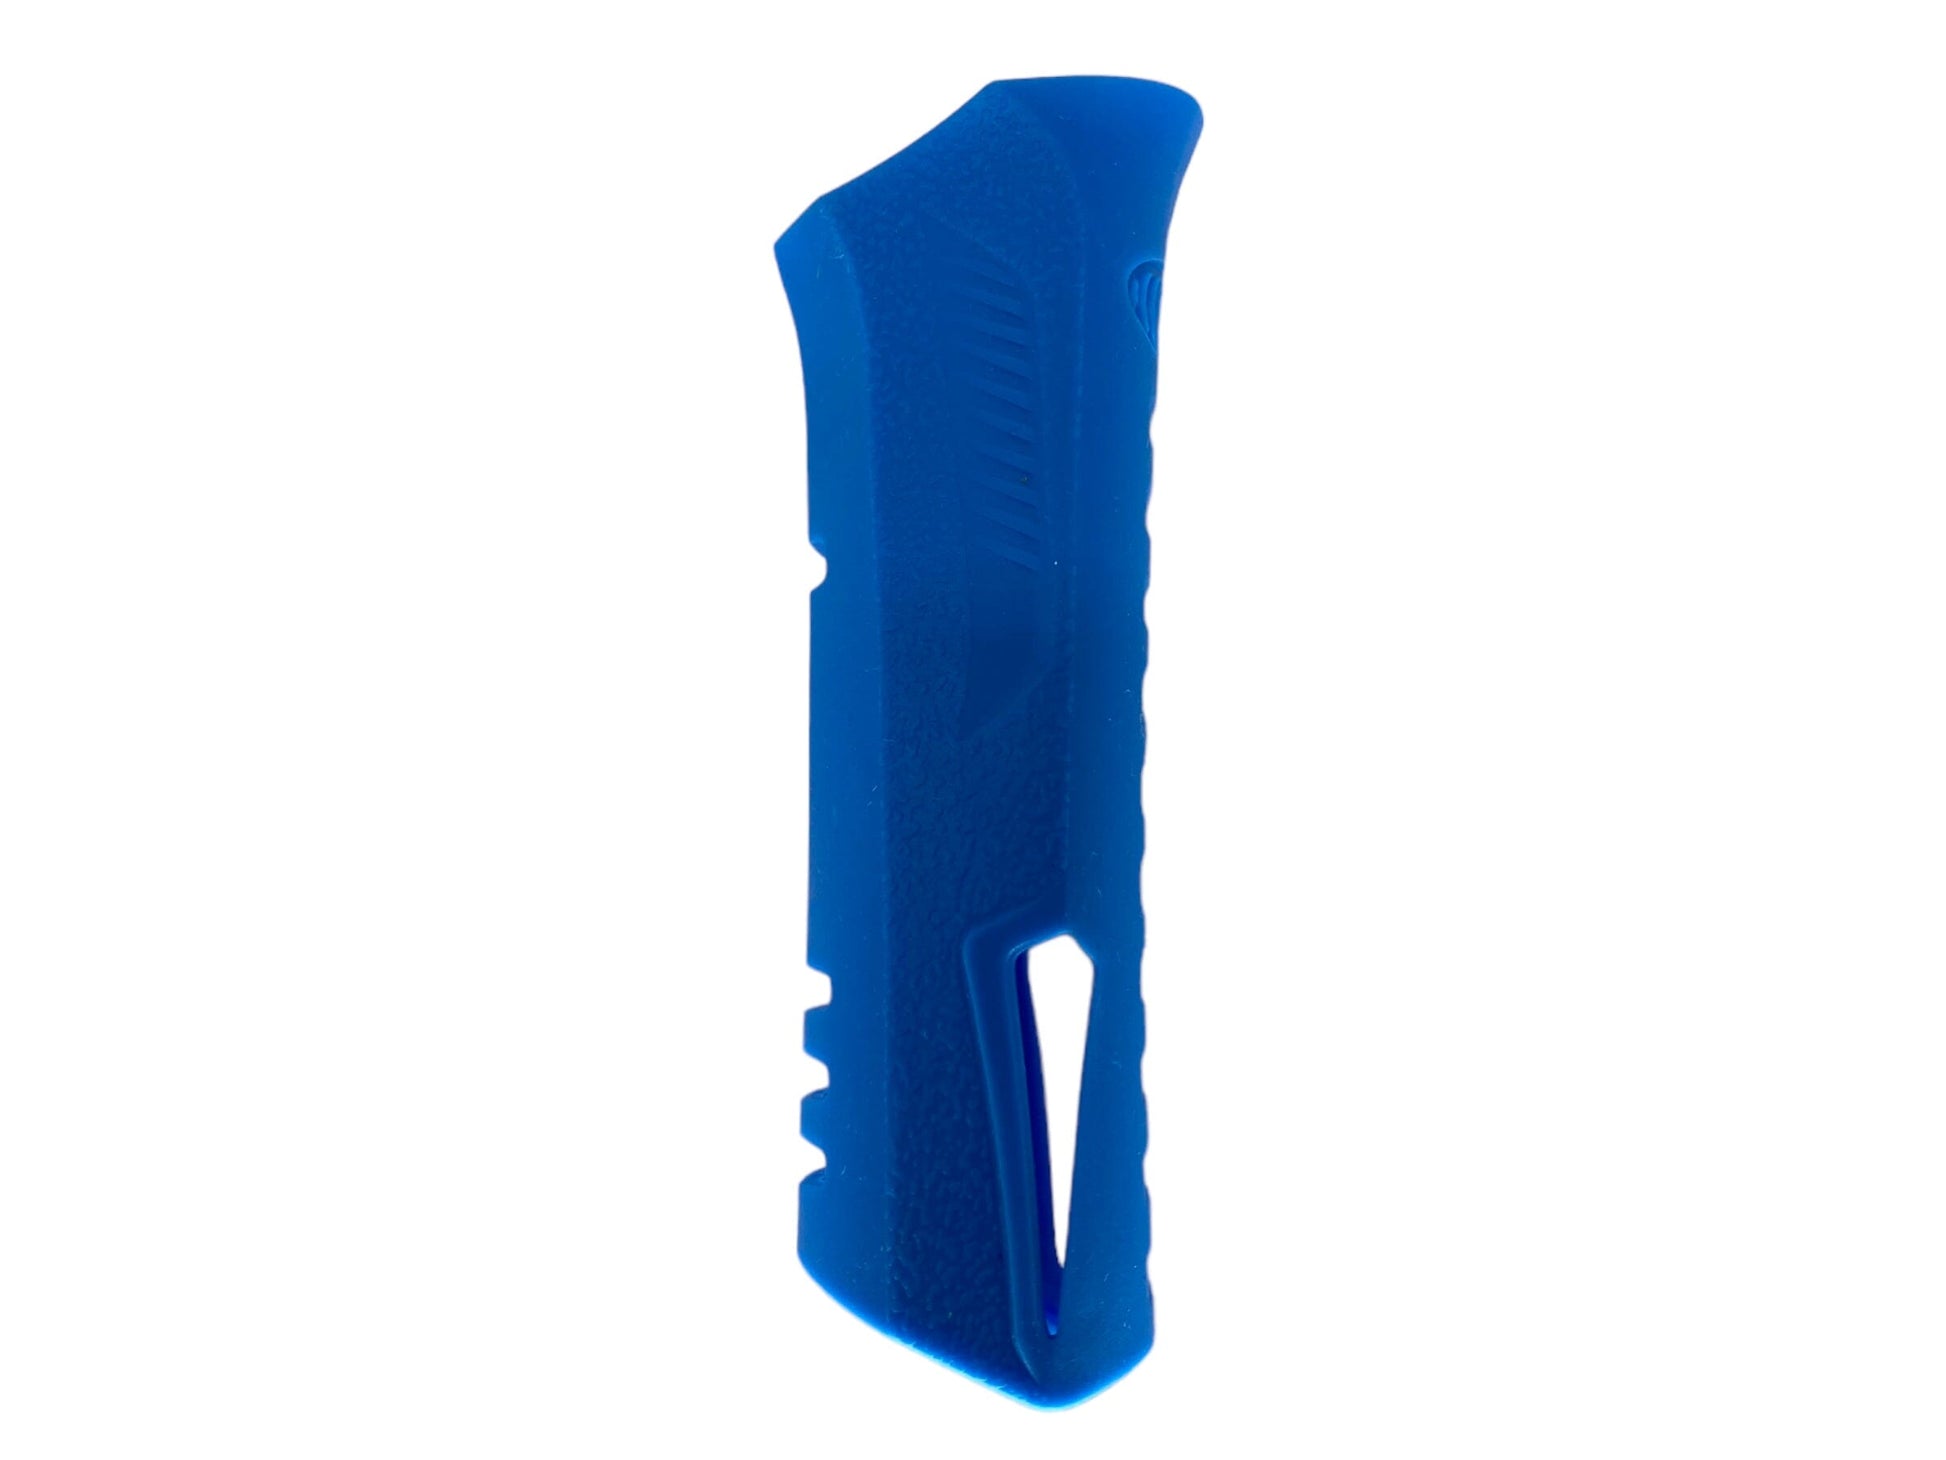 Used SP Shocker RSX/XLS Rubber Front Grip - Blue Paintball Gun from CPXBrosPaintball Buy/Sell/Trade Paintball Markers, Paintball Hoppers, Paintball Masks, and Hormesis Headbands